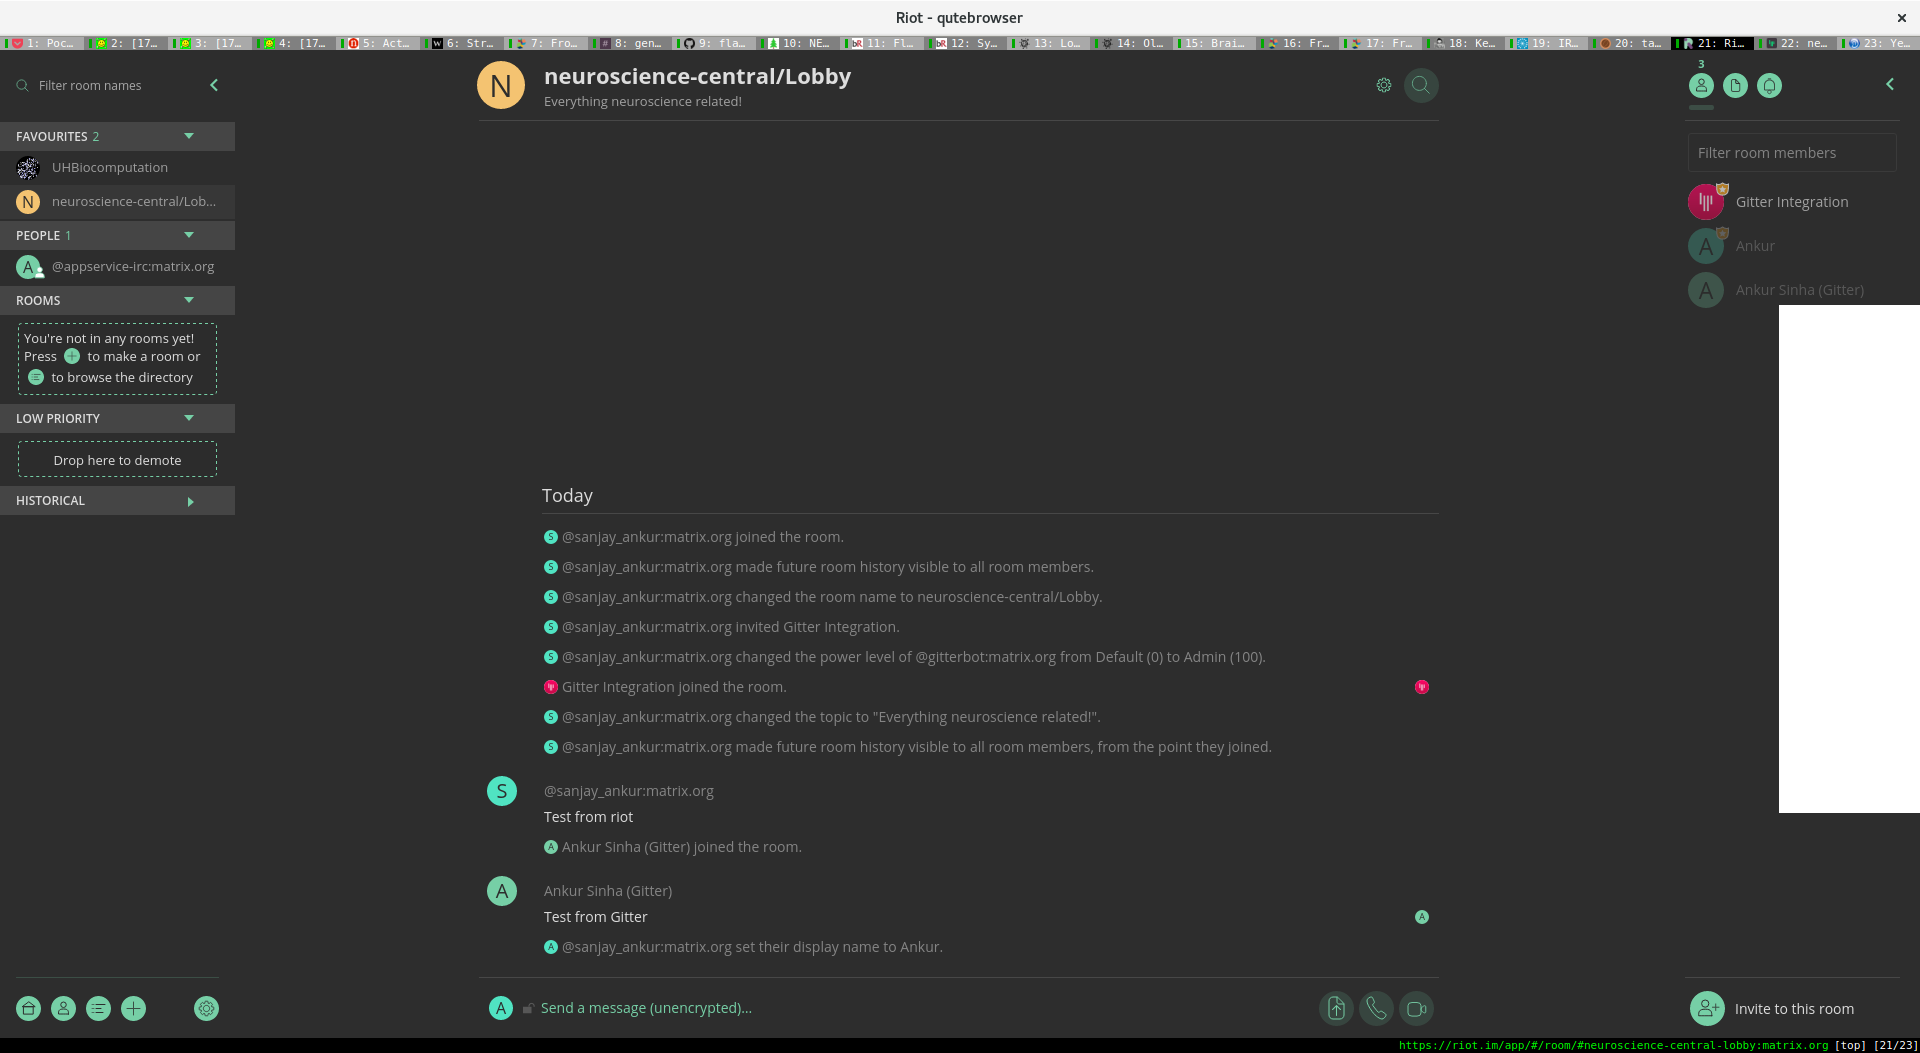 Neuroscience-Central/Lobby on Riot integrated with the same room on Gitter.